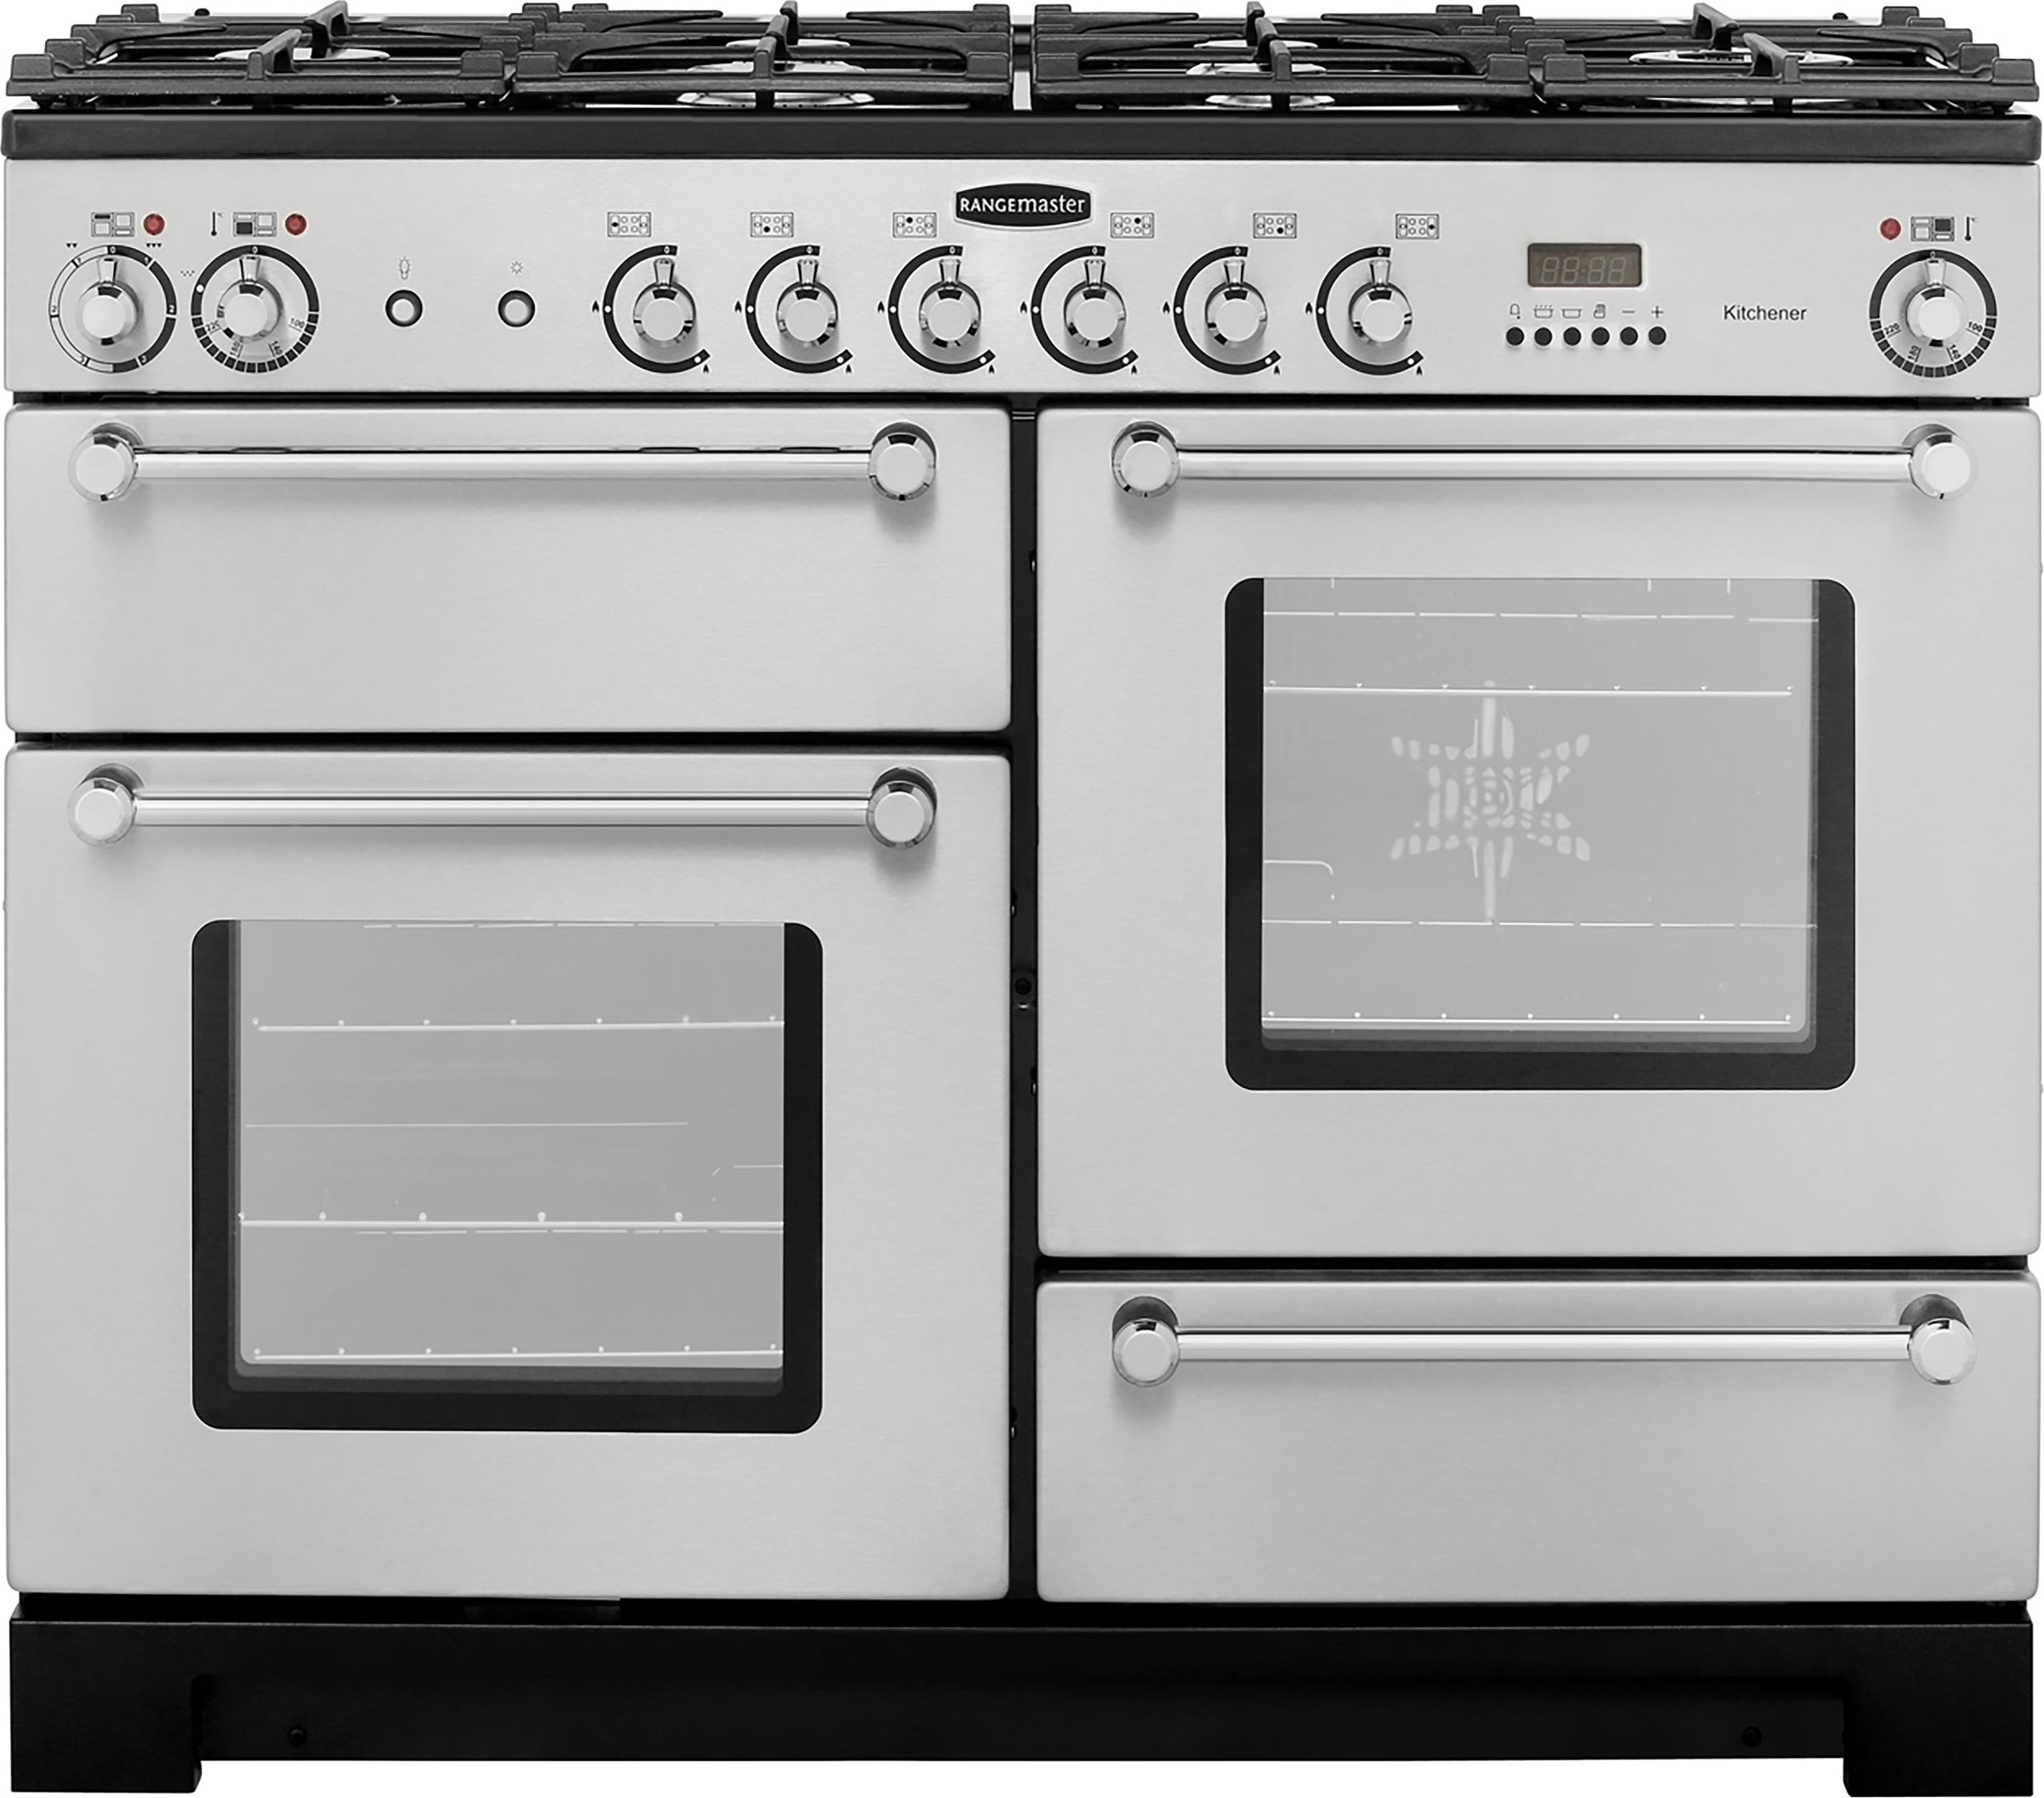 Rangemaster Kitchener KCH110DFFSS/C 110cm Dual Fuel Range Cooker - Stainless Steel / Chrome - A/A Rated, Stainless Steel